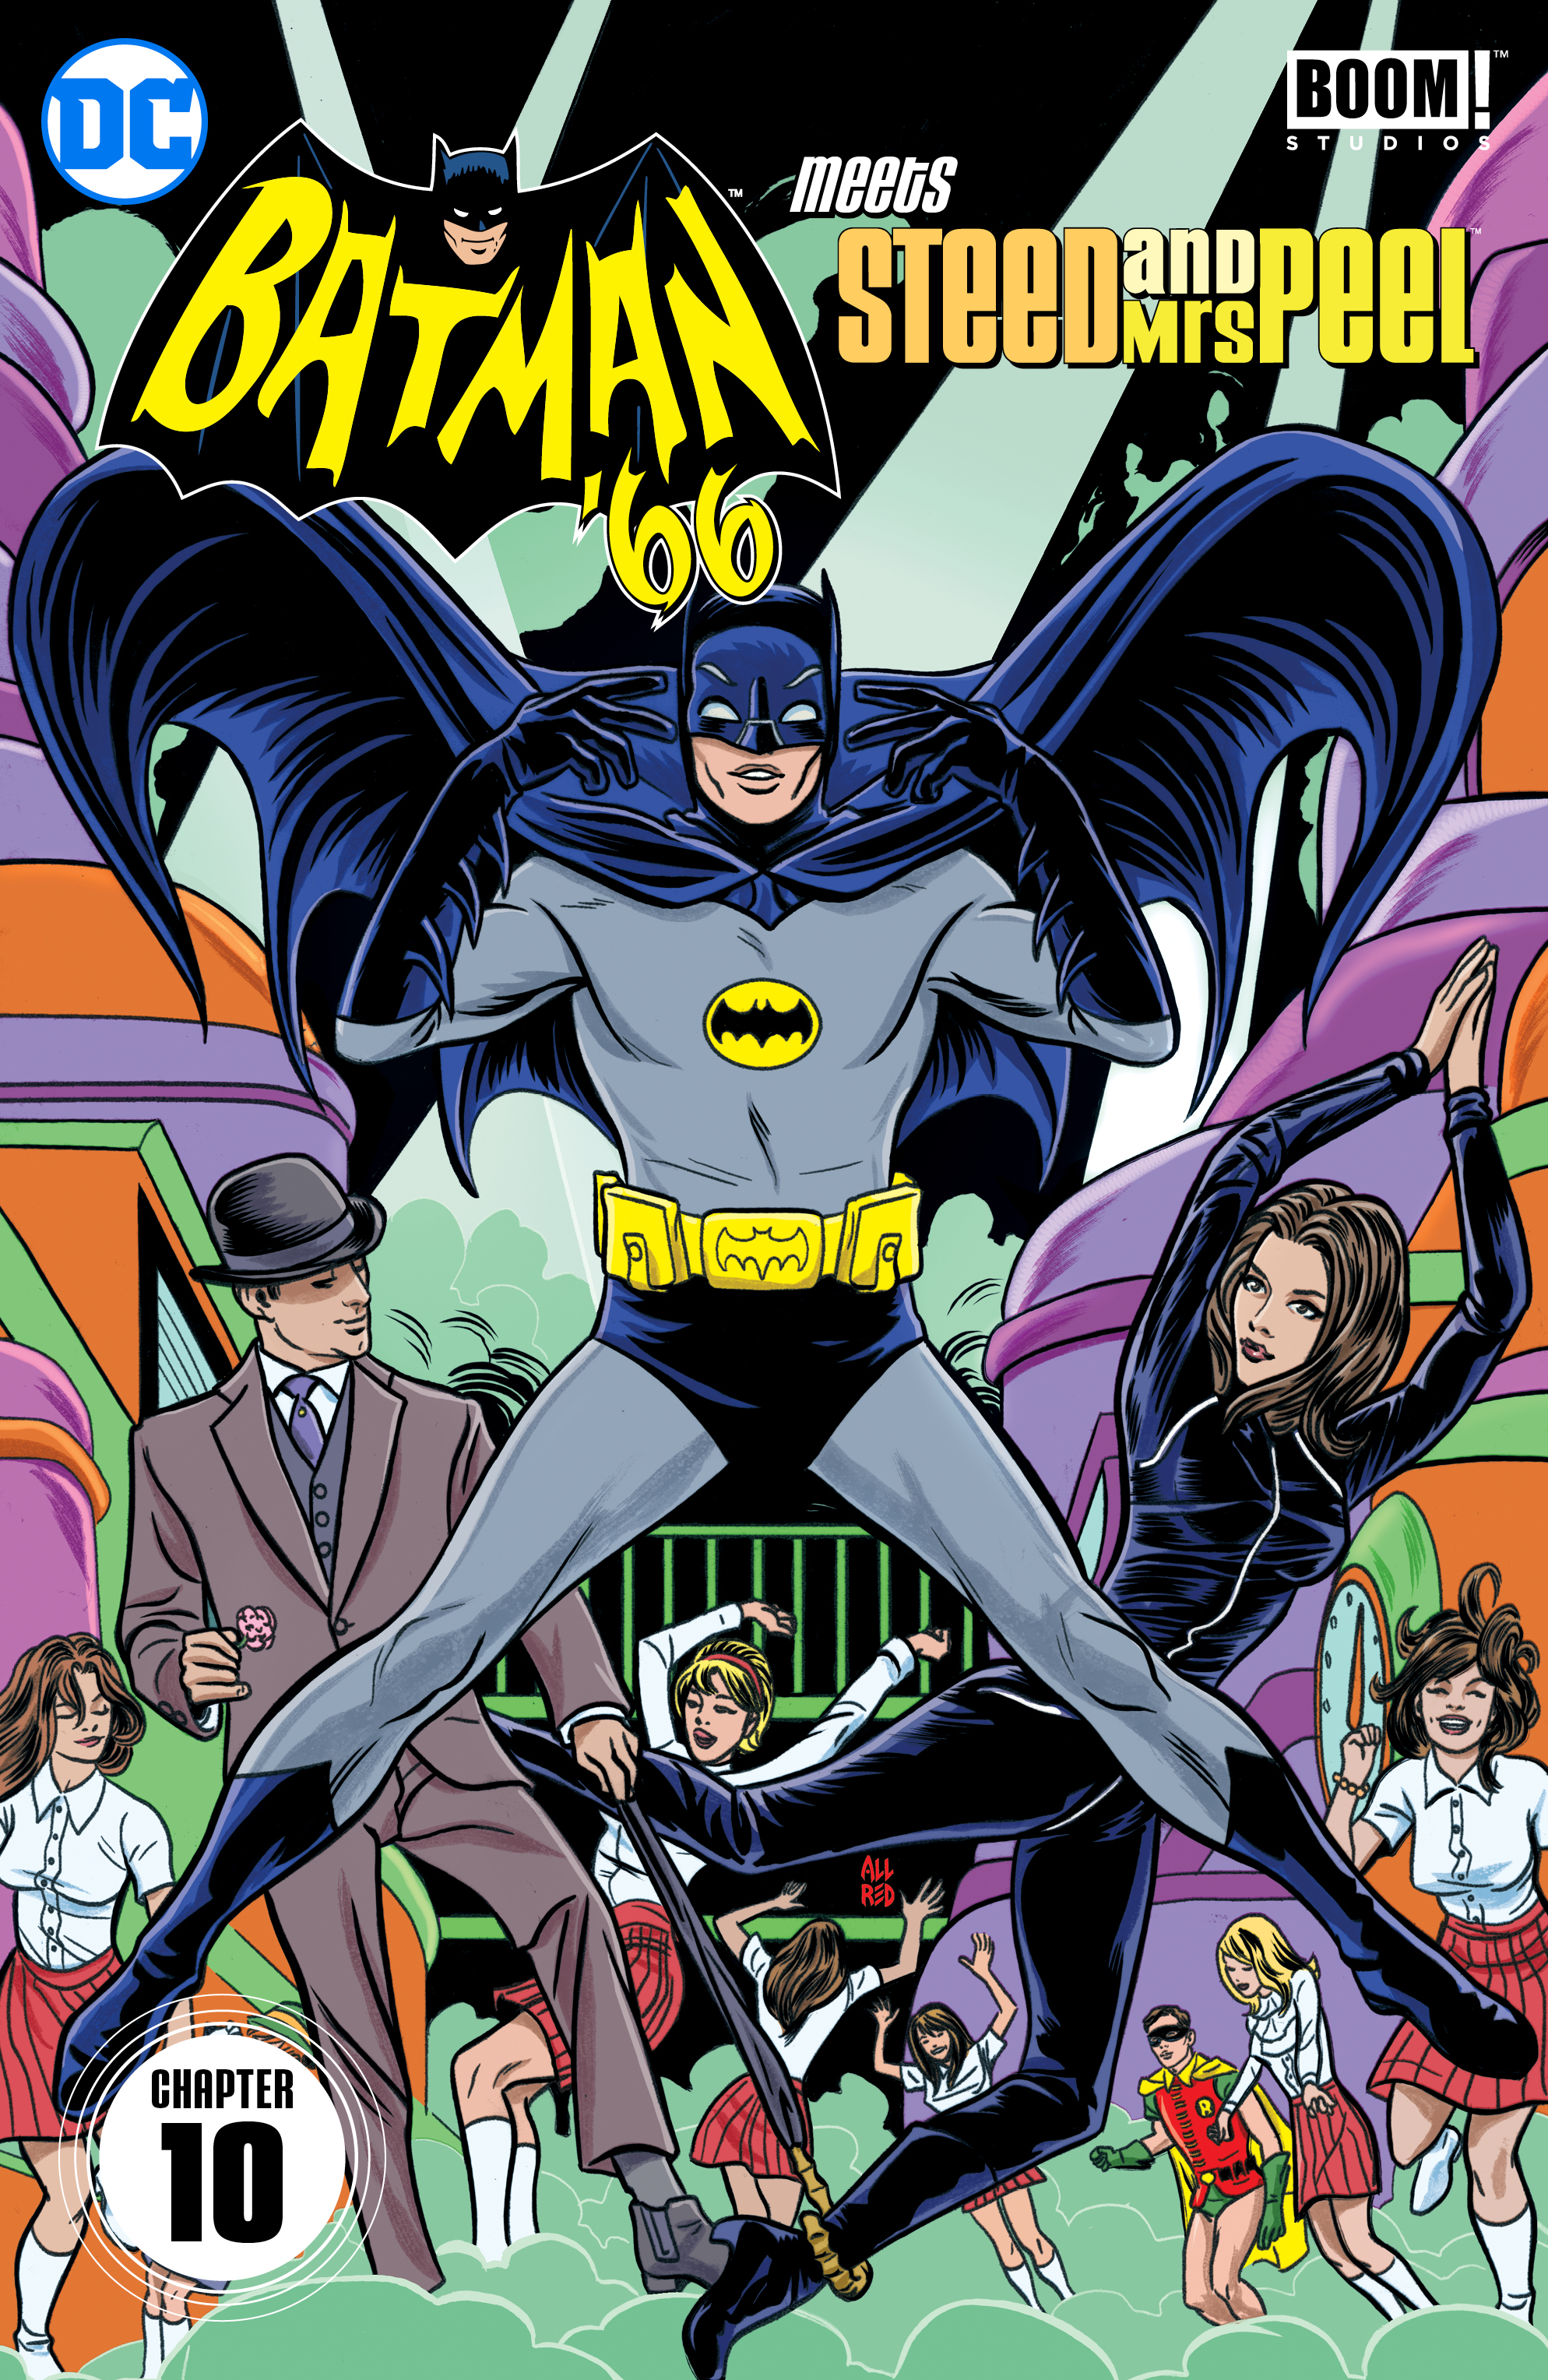 Batman '66 Meets Steed and Mrs Peel #10 preview images